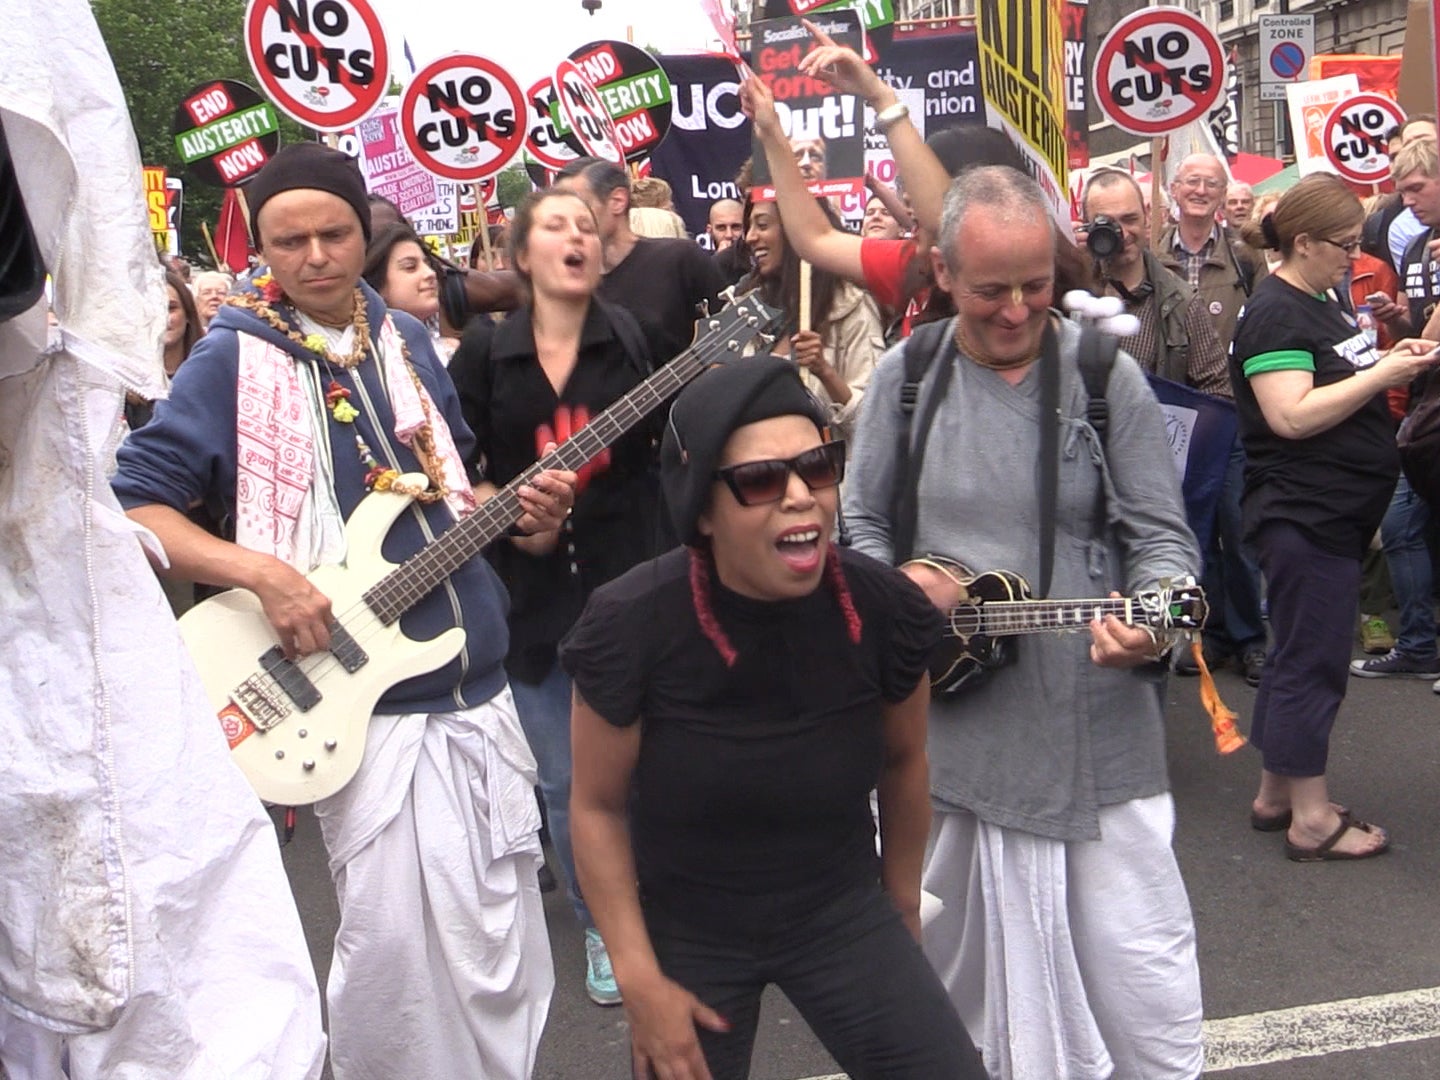 Street band performing The Troggs' 'Wild Thing' at the anti-austerity demonstration in London